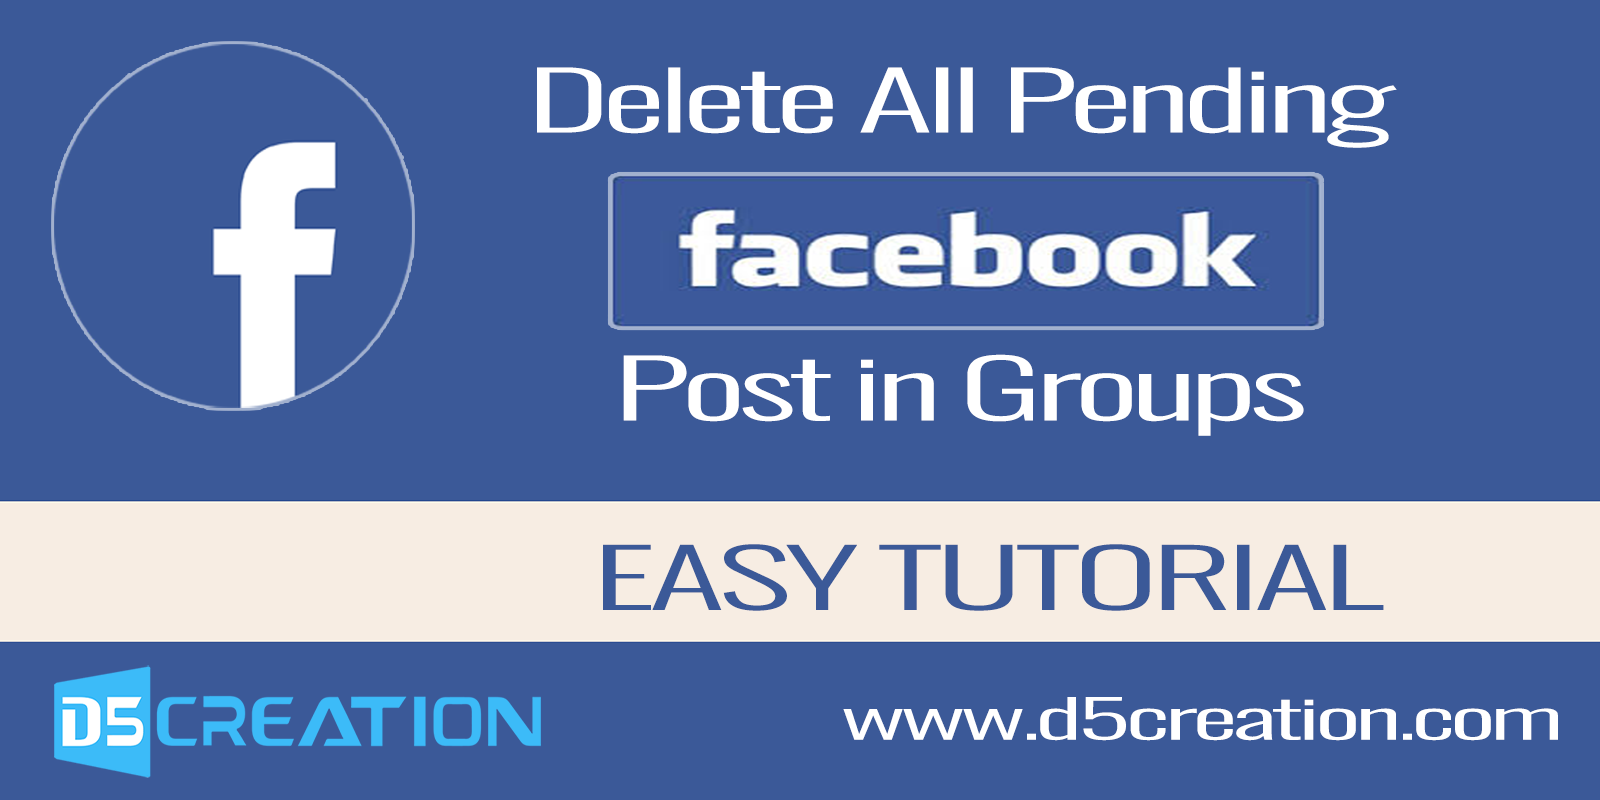 How to Delete All Pending Facebook Posts in Groups at Once - D25